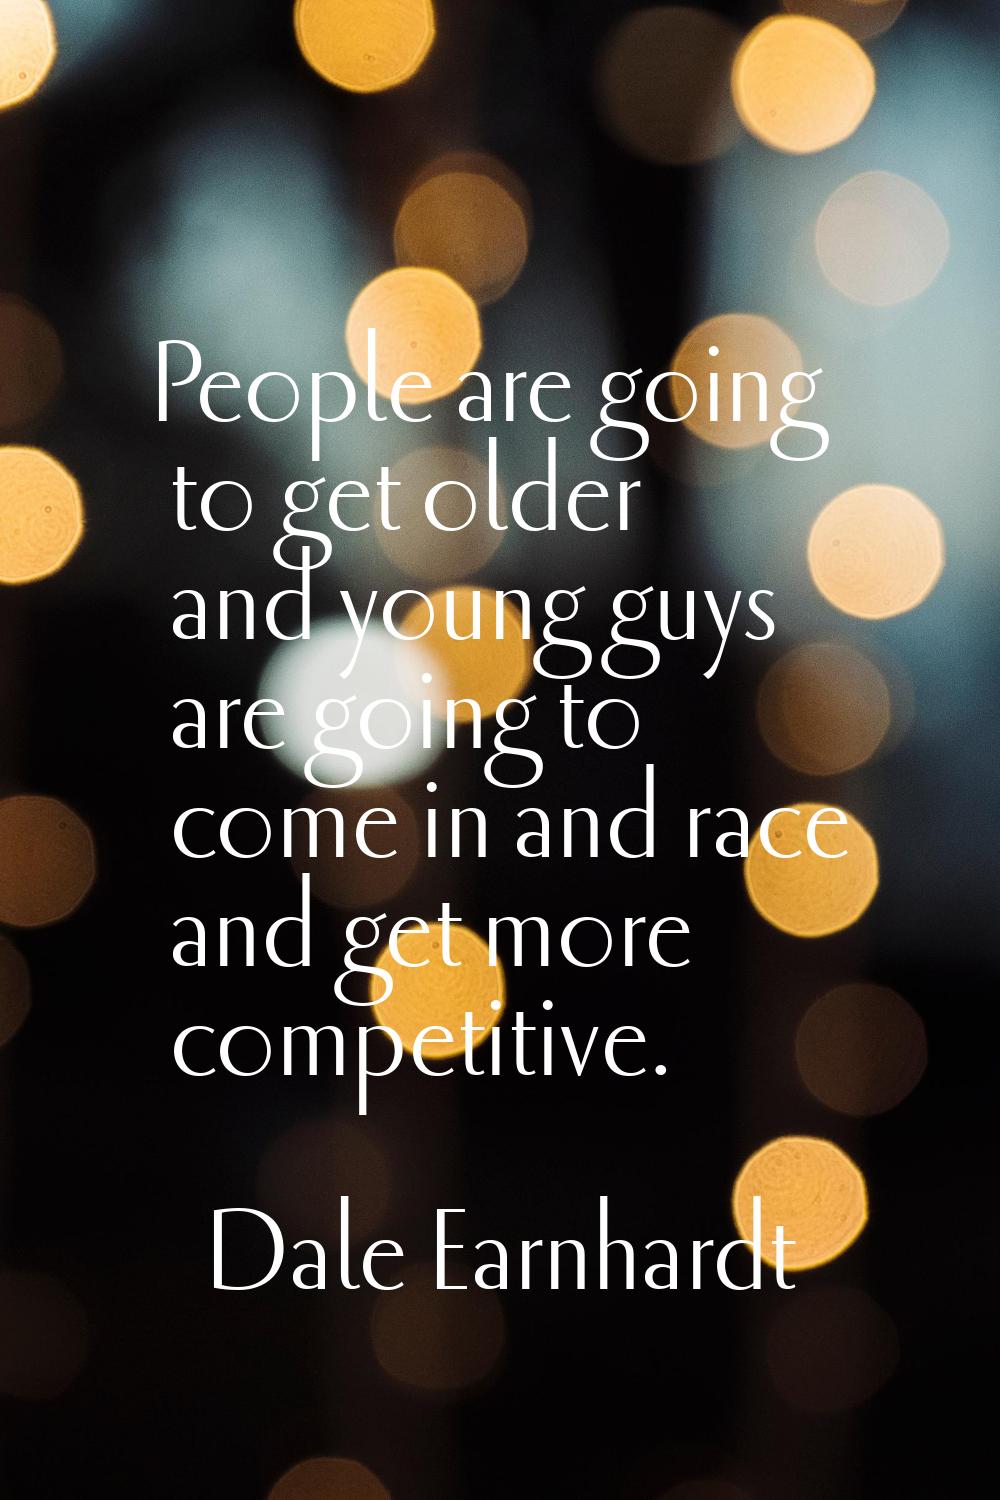 People are going to get older and young guys are going to come in and race and get more competitive